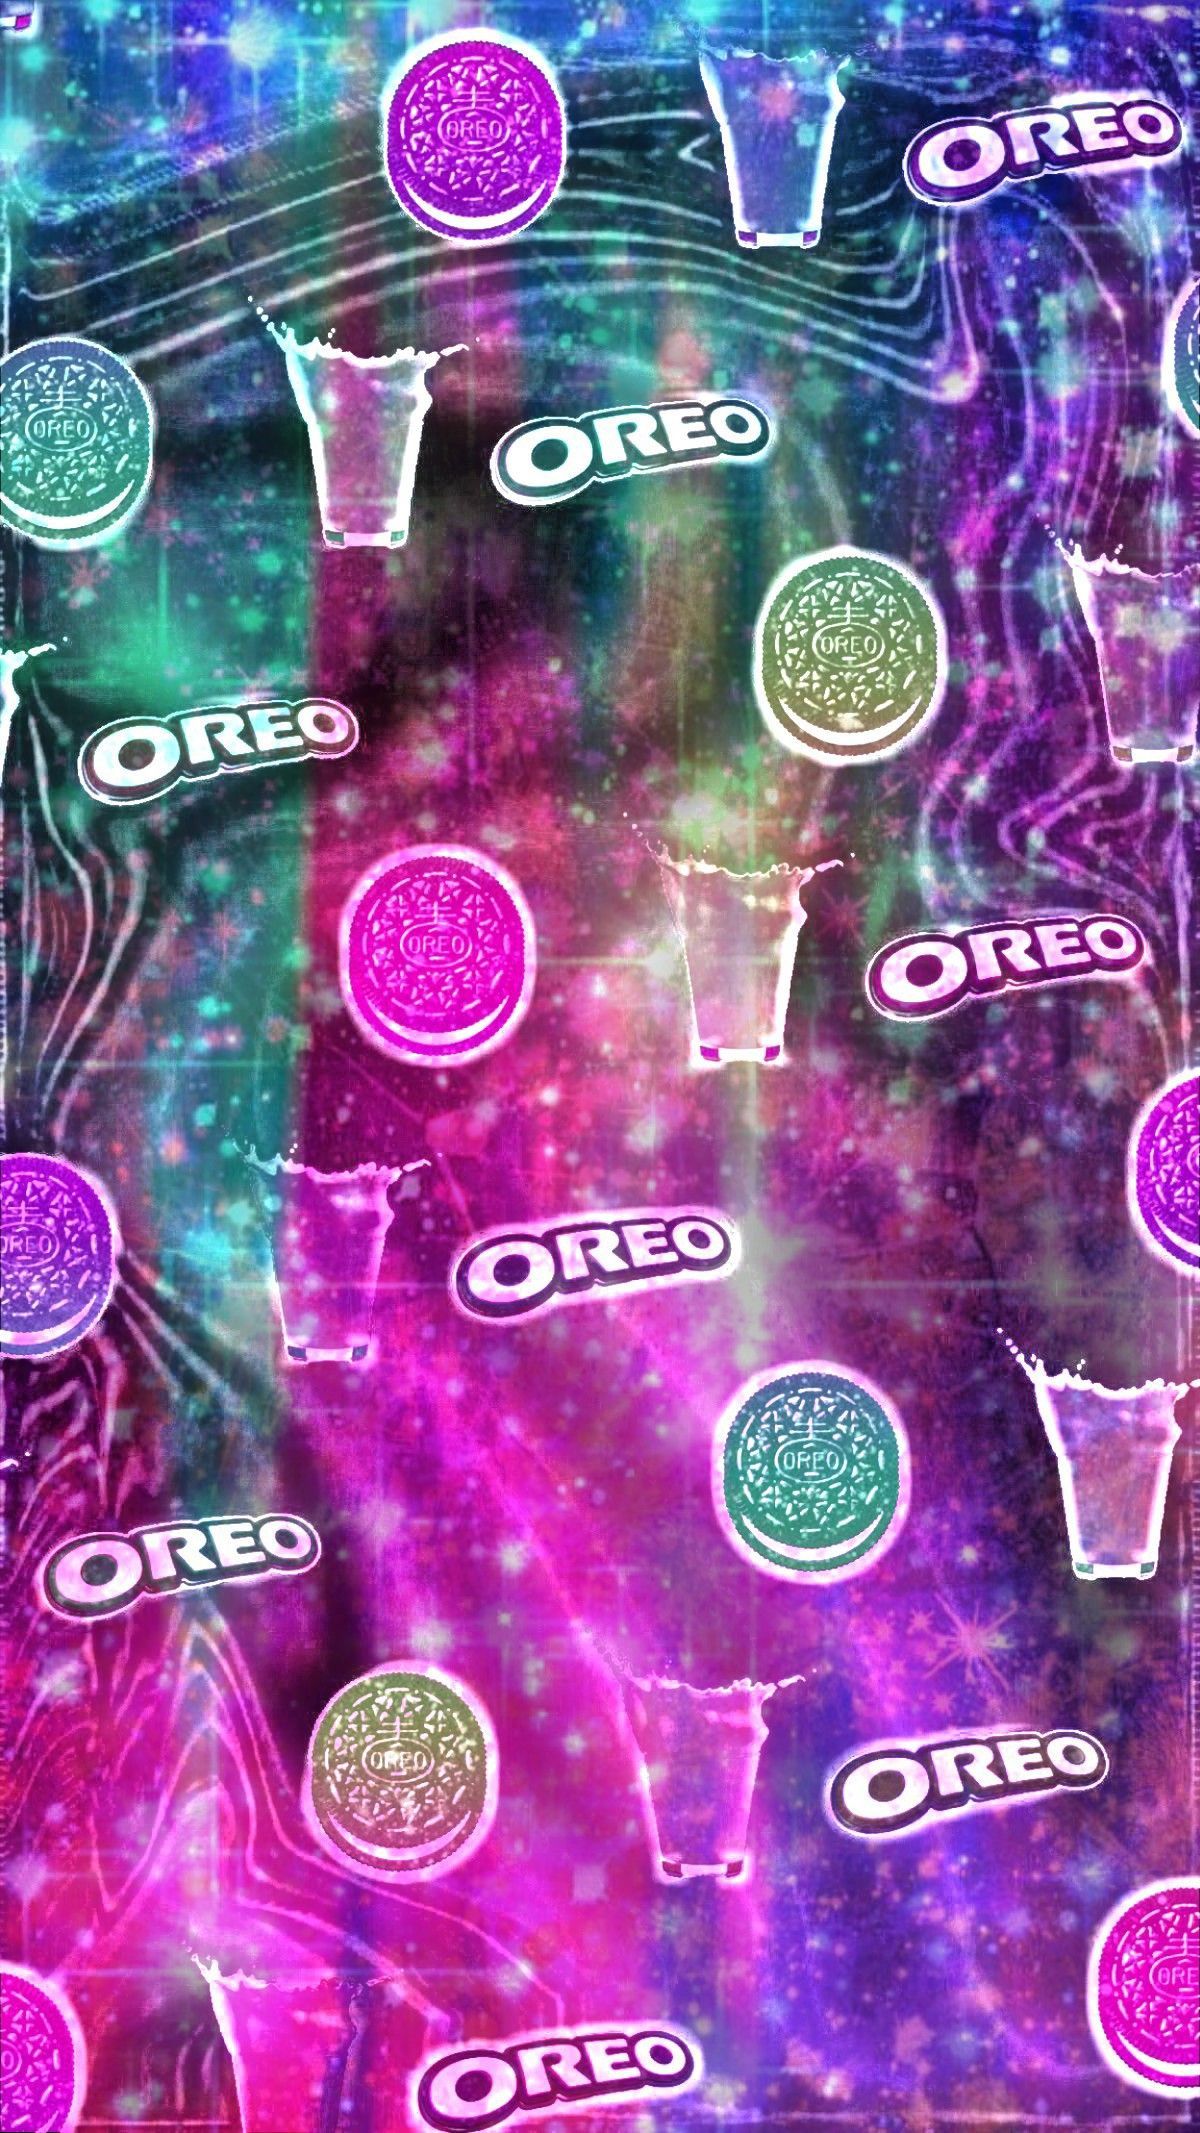 A psychedelic background with various food items - Oreo